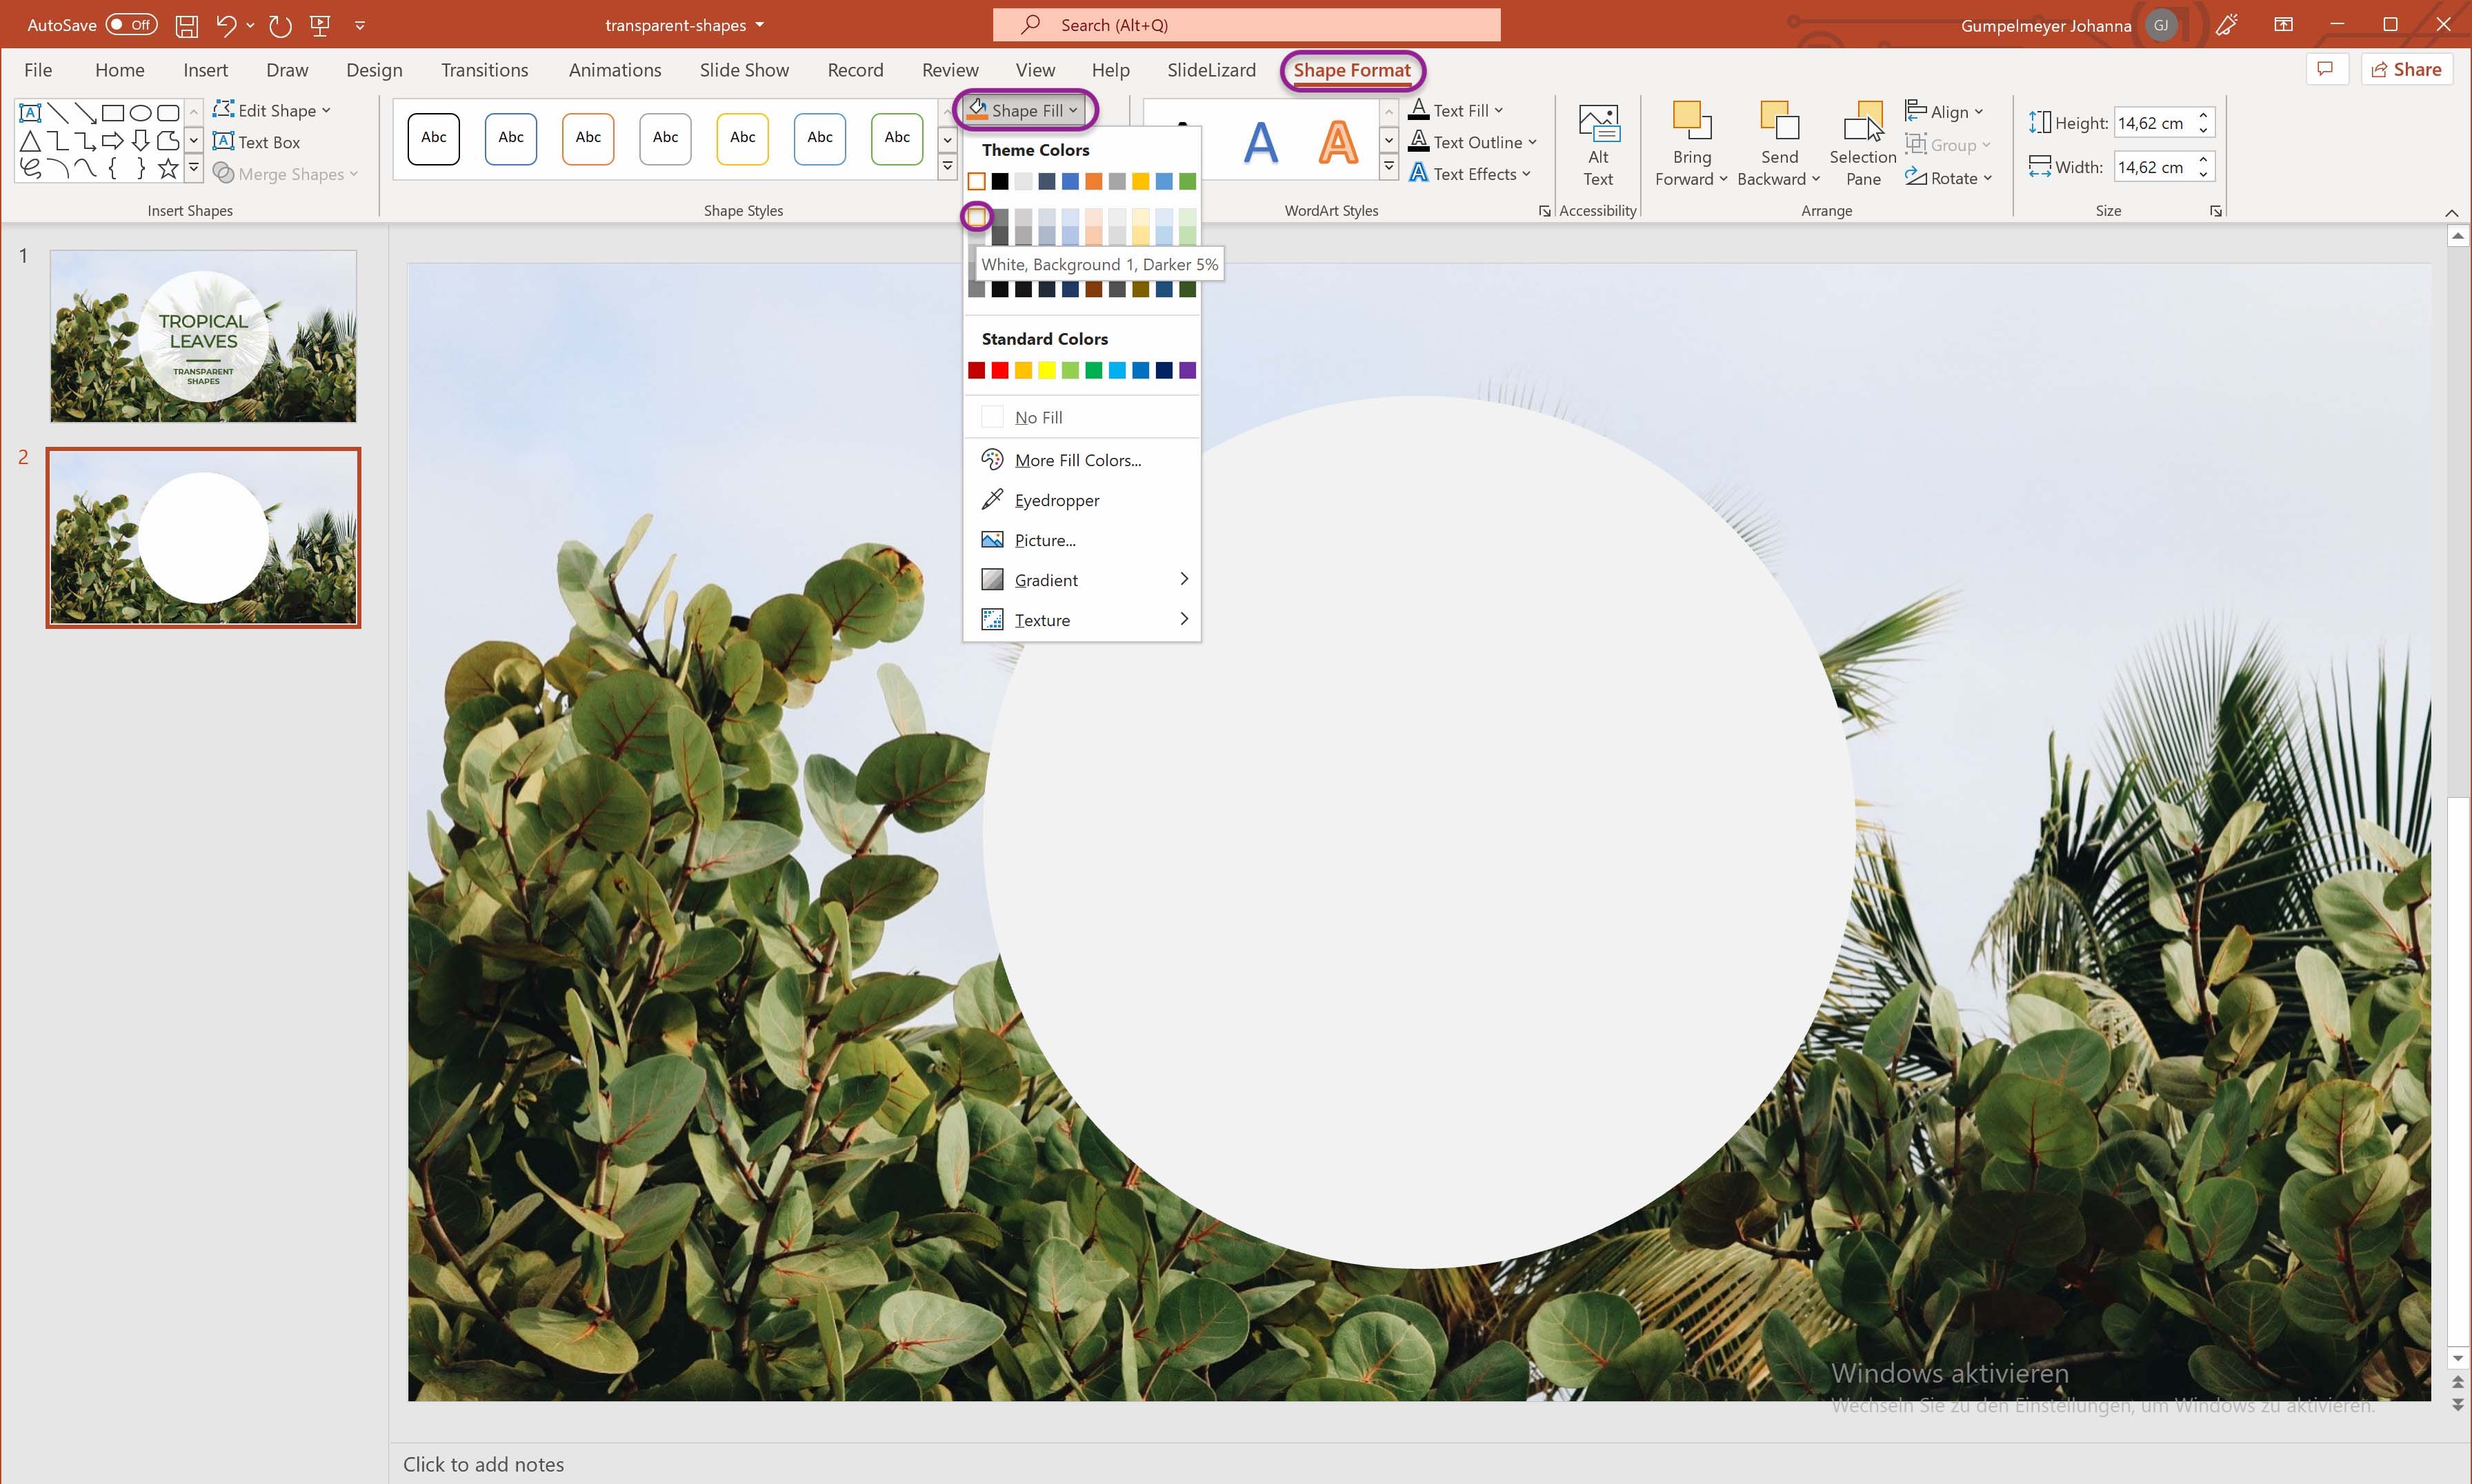 Make a picture transparent in PowerPoint (2022) | SlideLizard®